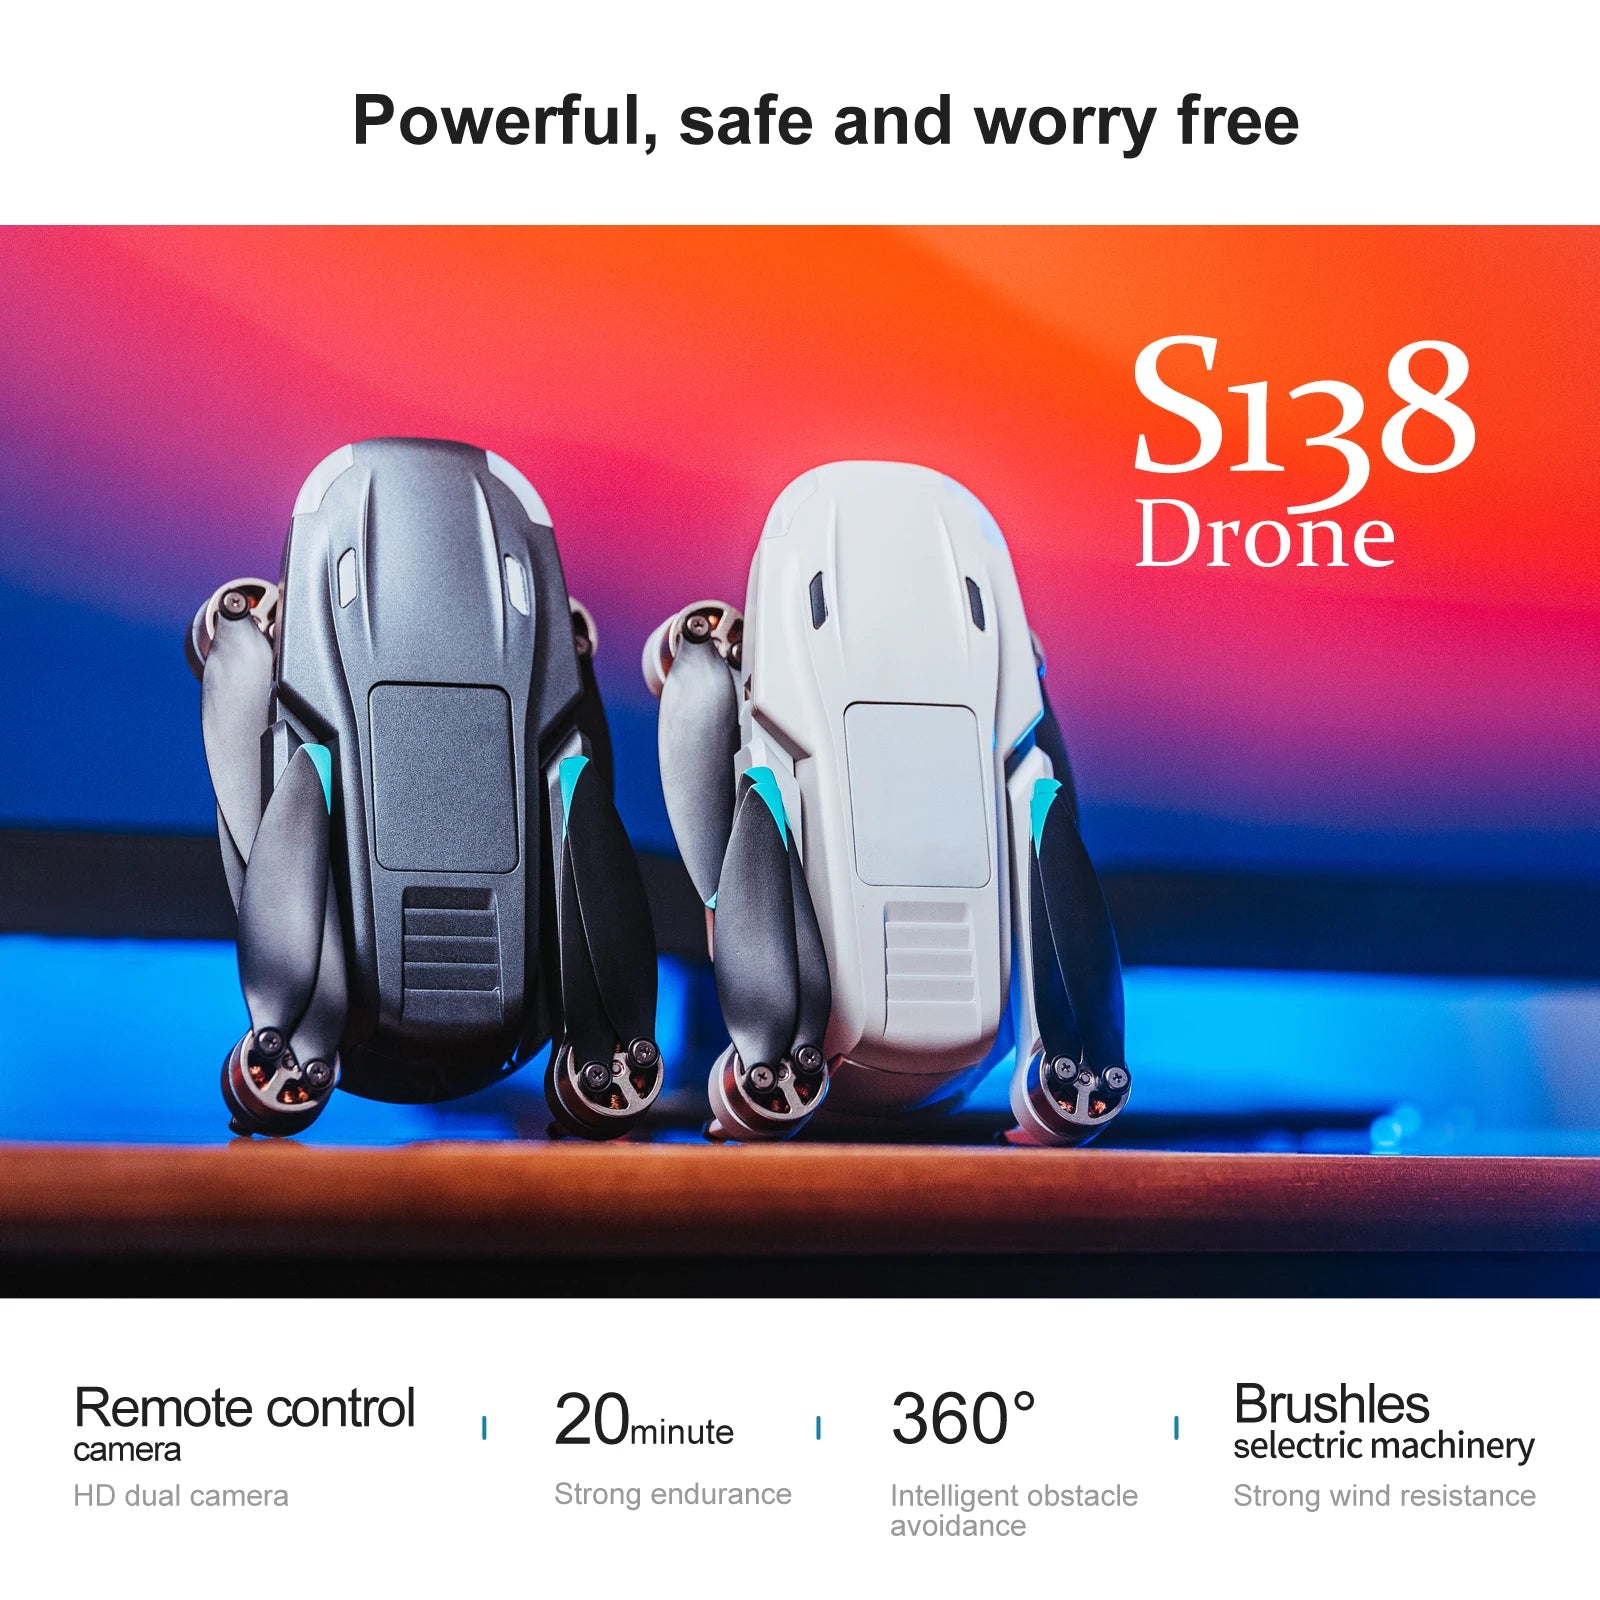 S138 Drone, powerful, safe and worry free s138 drone remote control 2o